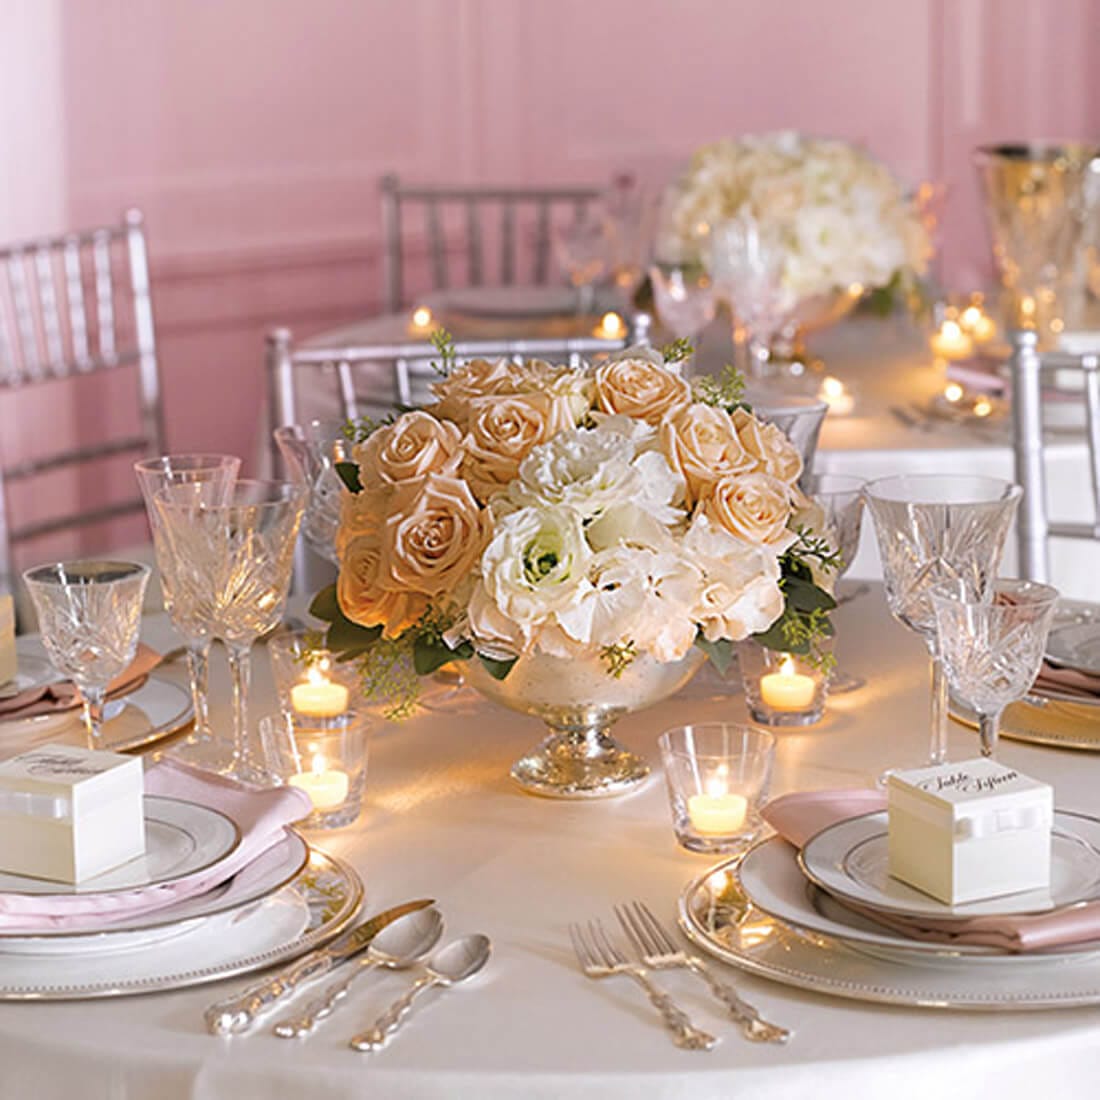 Tablescapes, Centerpieces and Decor Inspiration Gallery